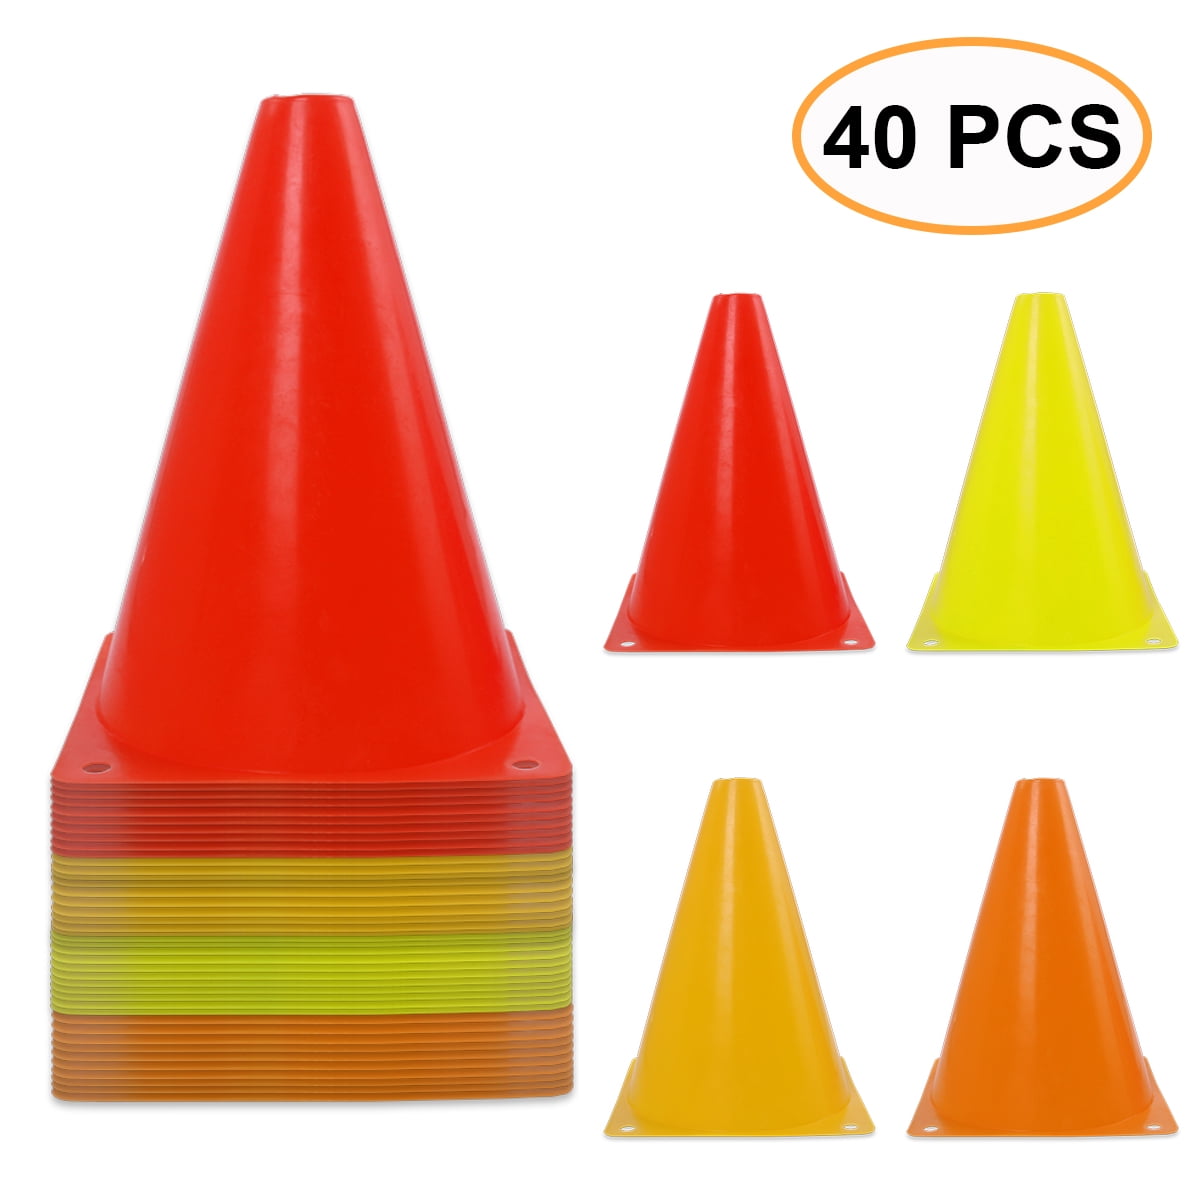 7/9 Inch Plastic Traffic Cones Set of 24/10 Thicken Agility Training Field Marker Cones Sports for Soccer Football Basketball Drills Training Pro Training Cones Orange 